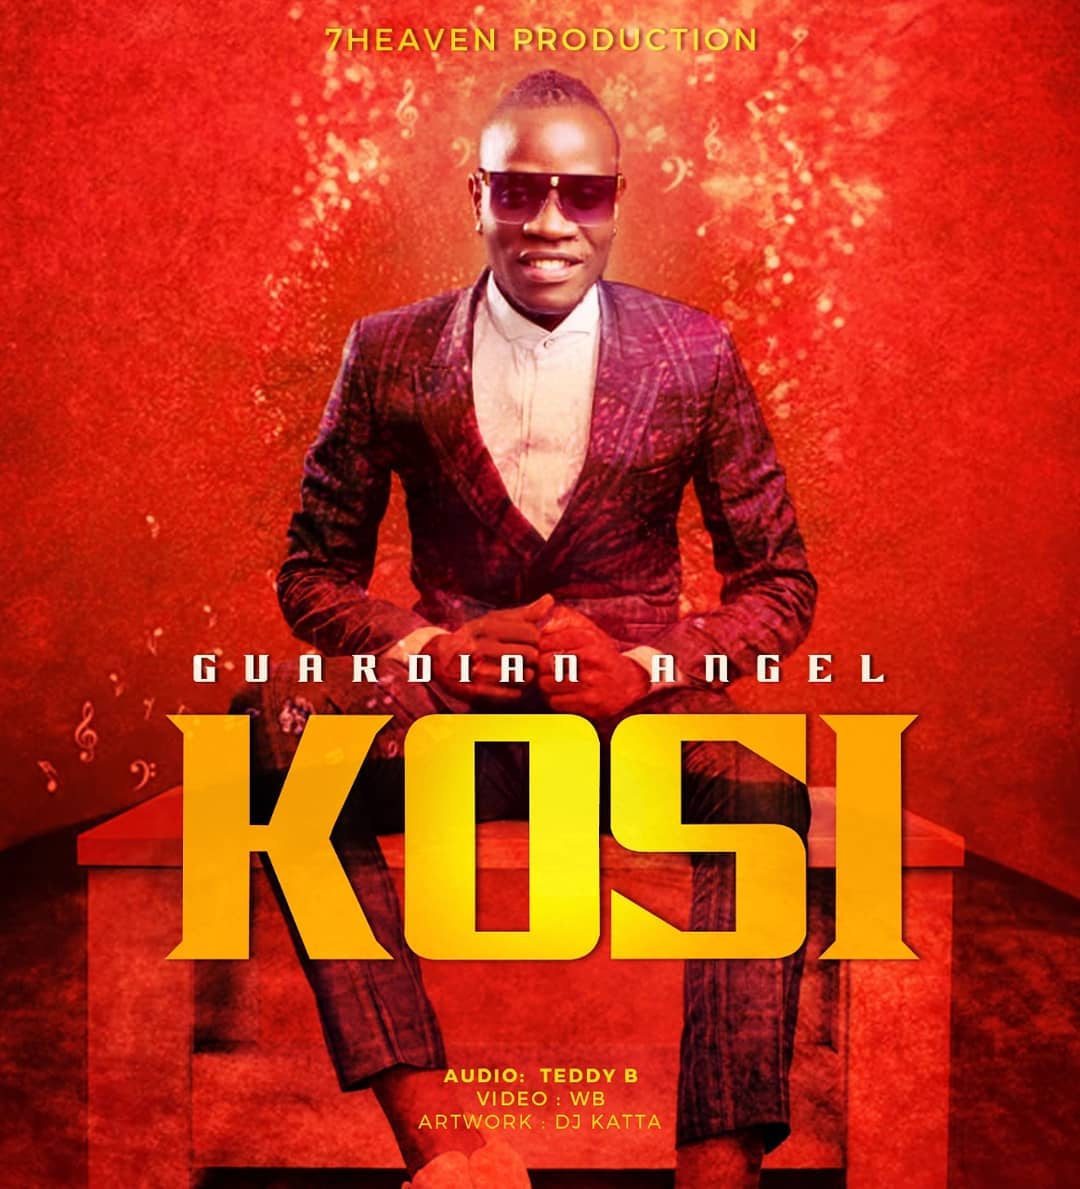 Guardian angel calls on God for blessings in “Kosi”